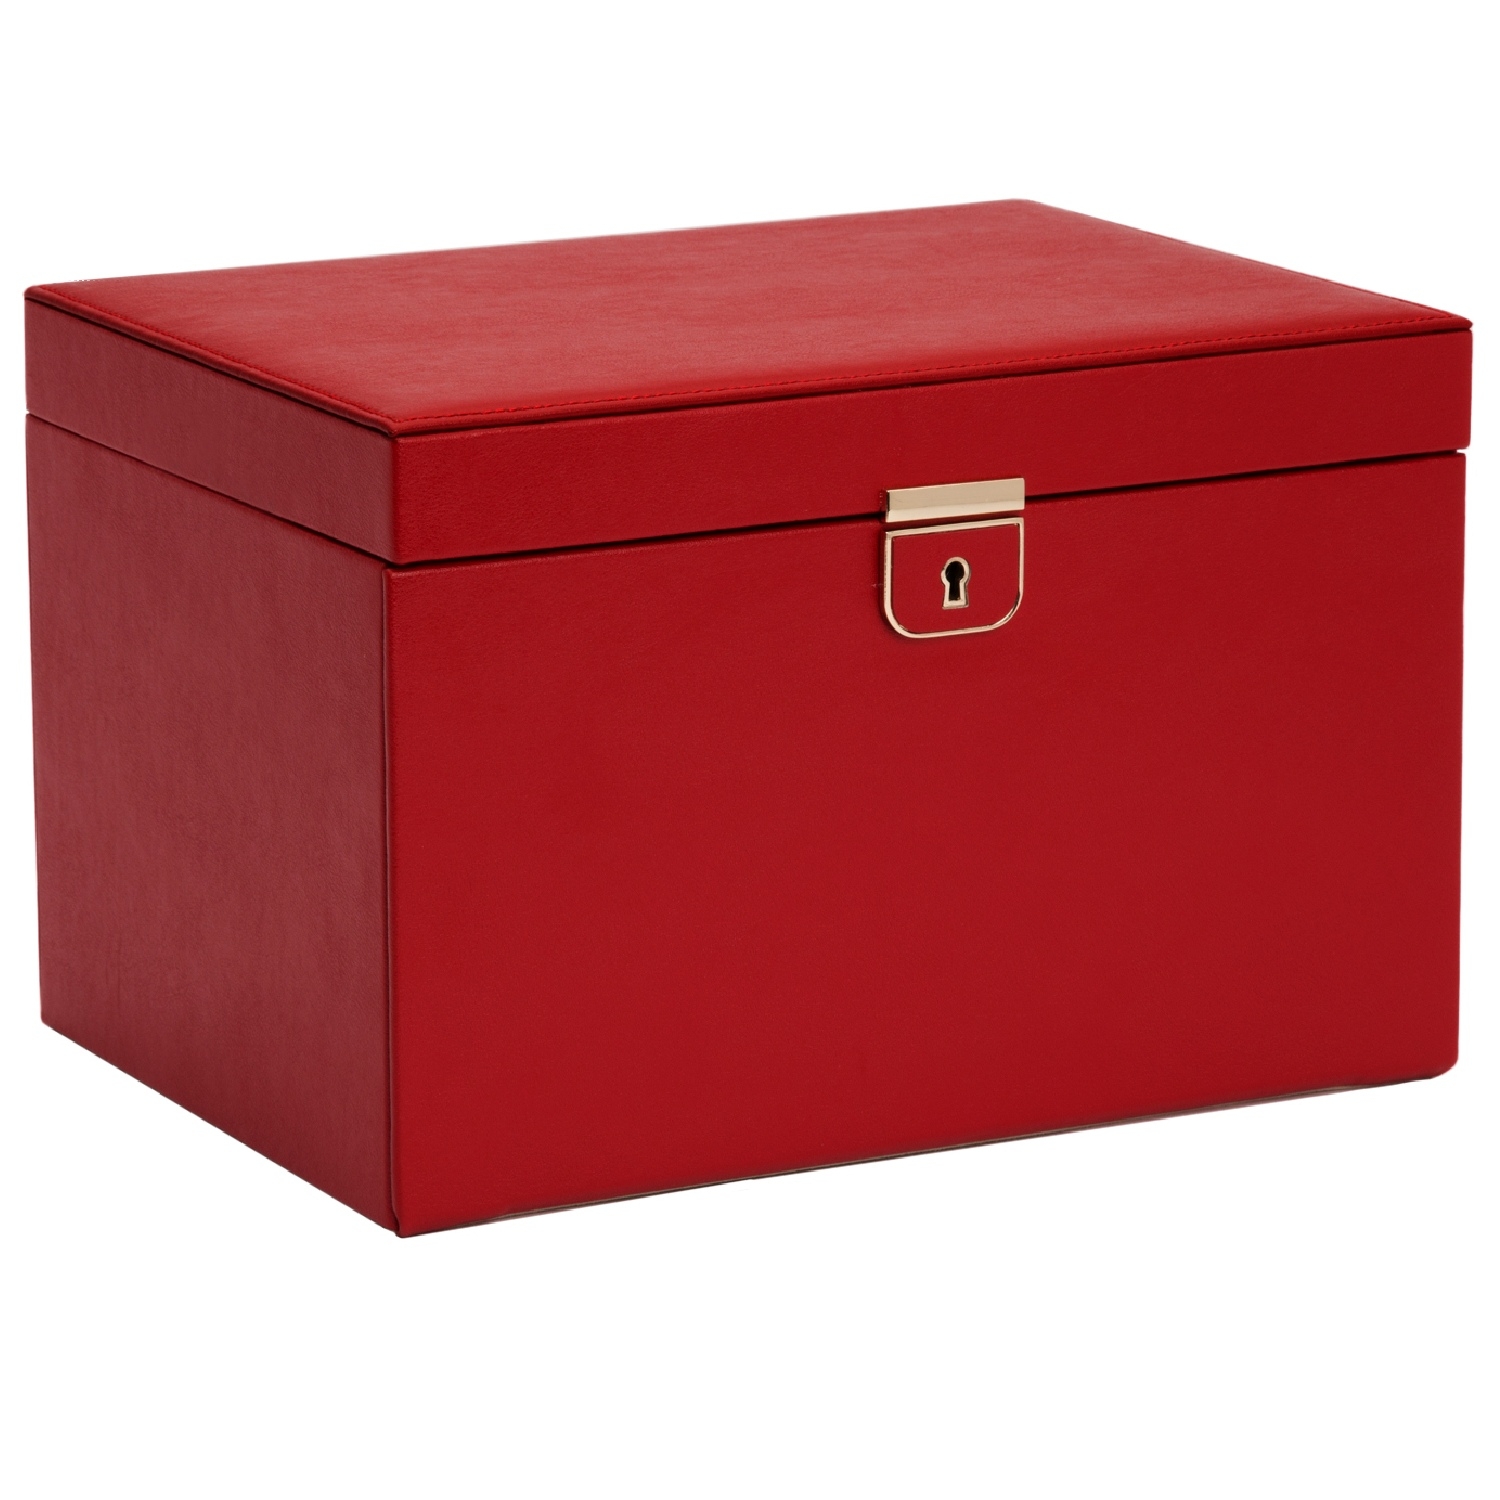 Wolf 1834 Palermo Modern Classic Red Leather Jewelry Box - Large - Image 1